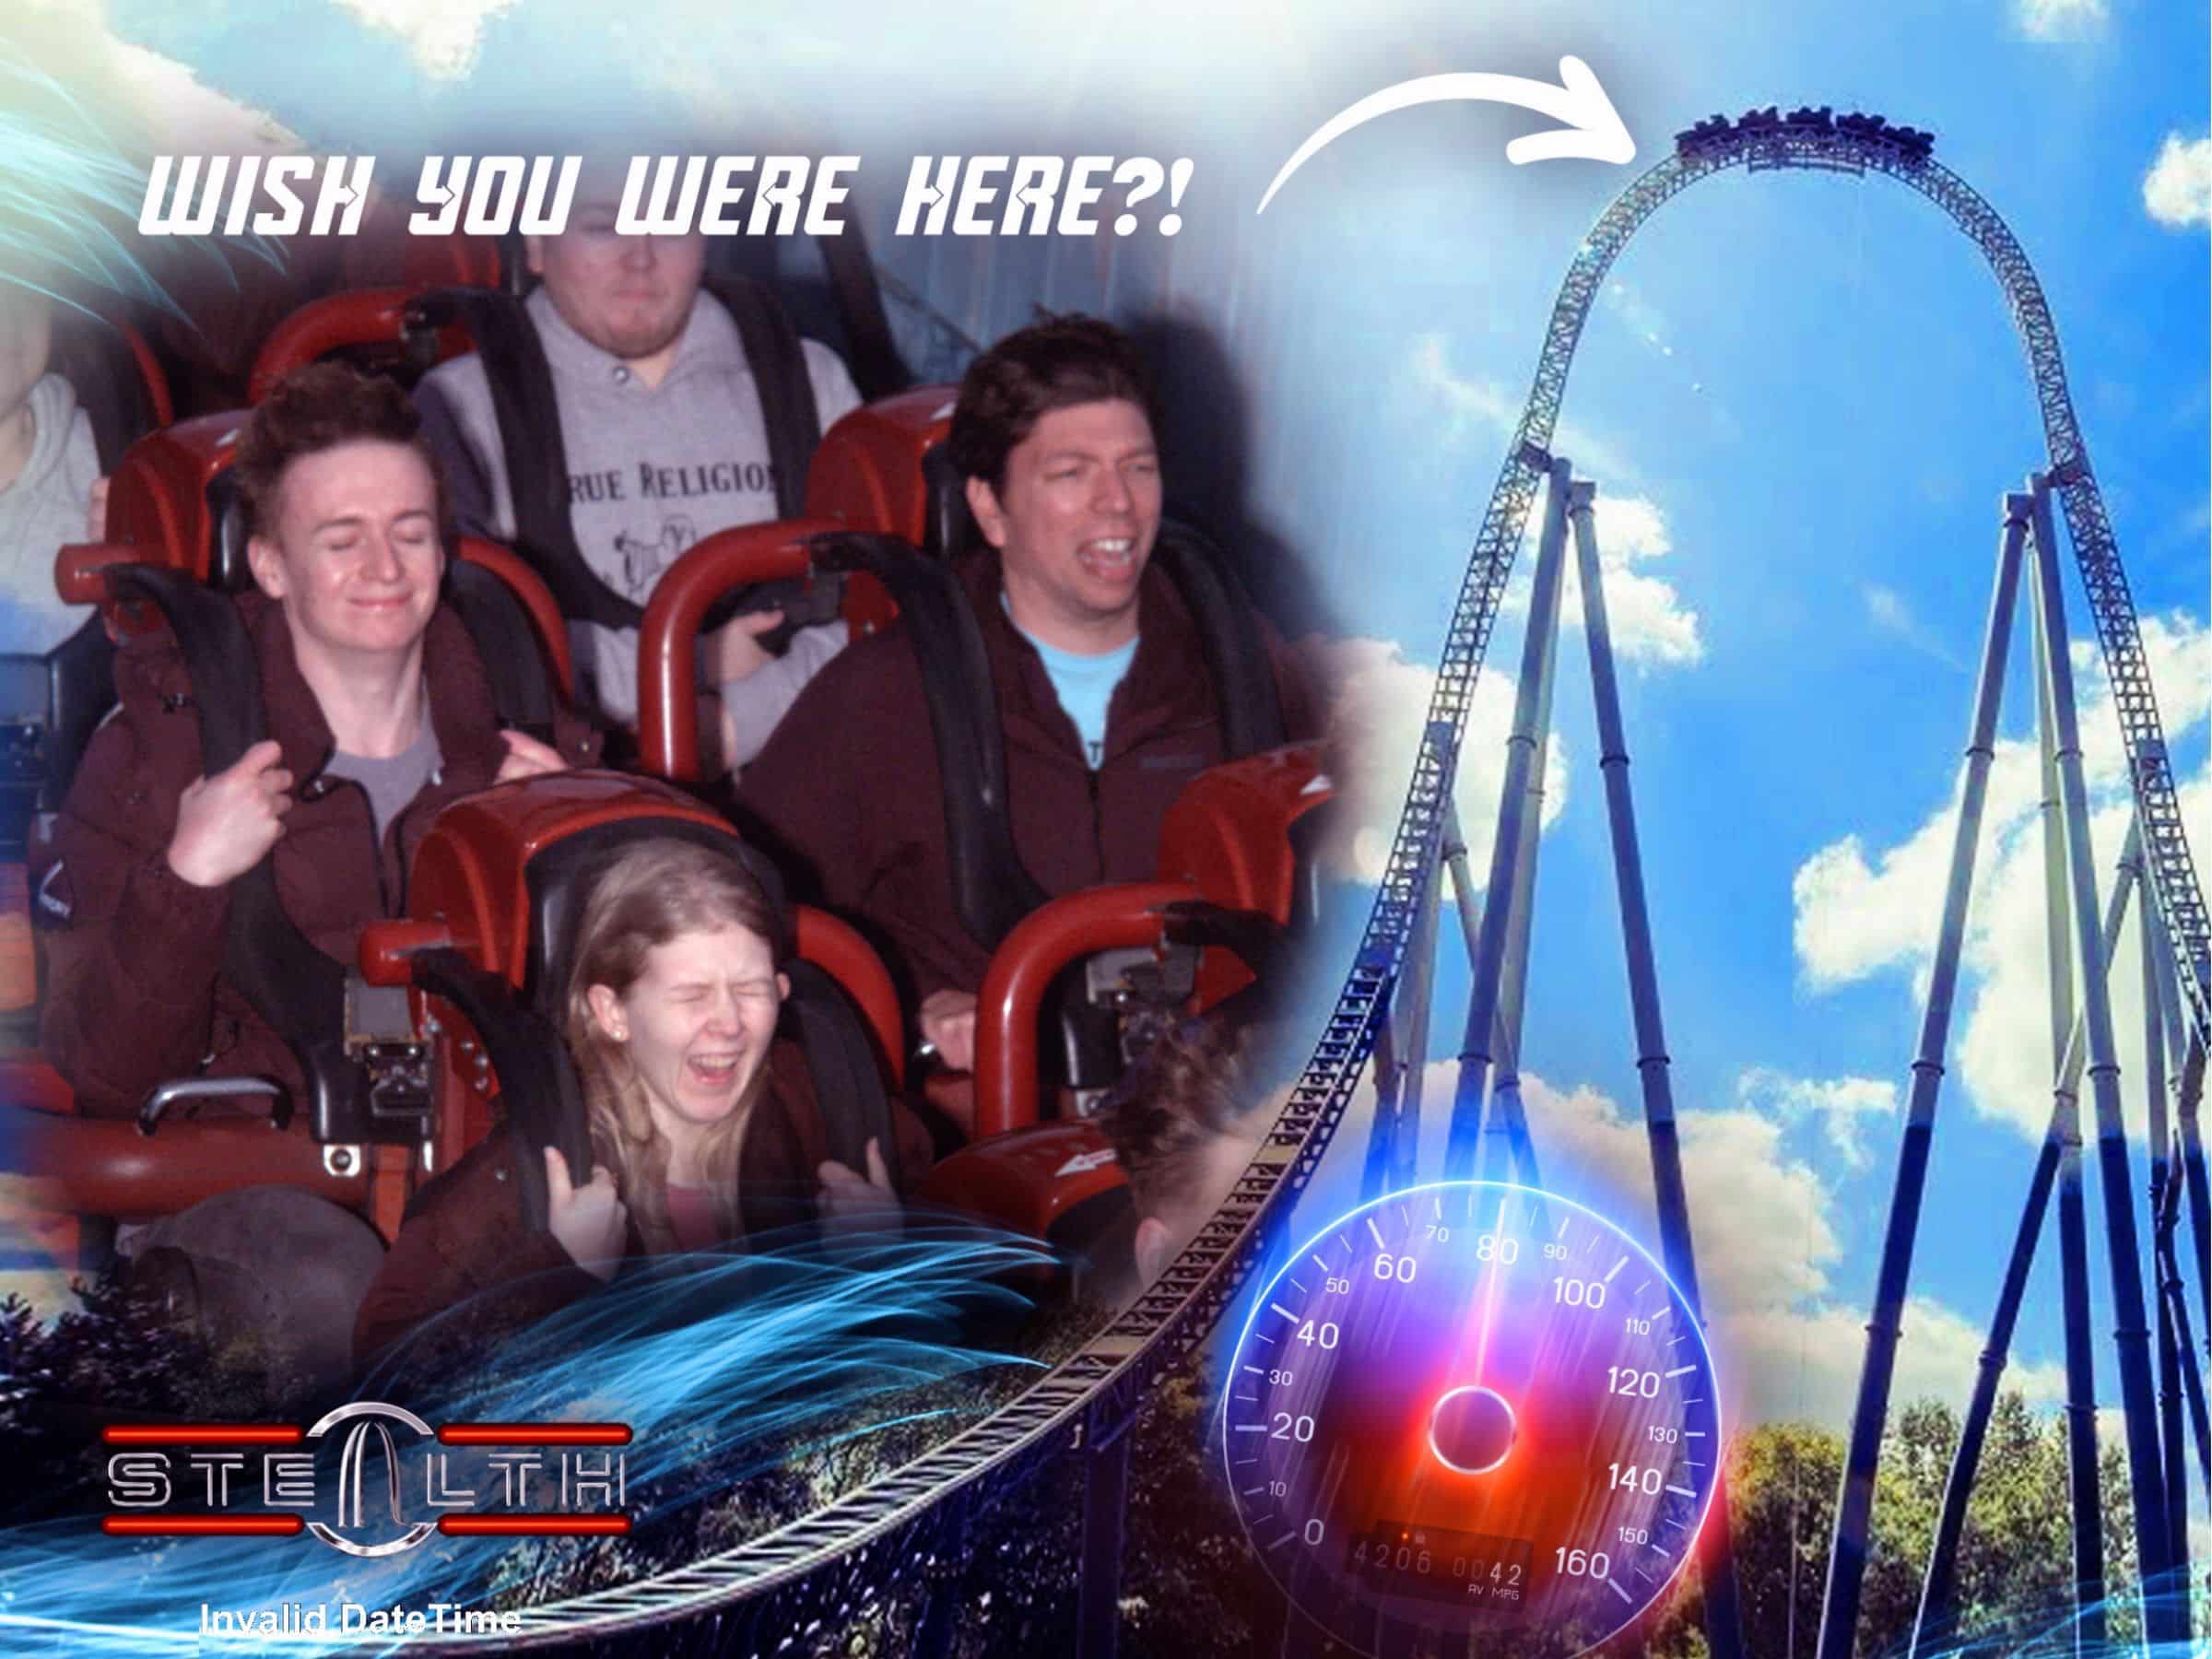 Riding Stealth (with another blissful stranger)